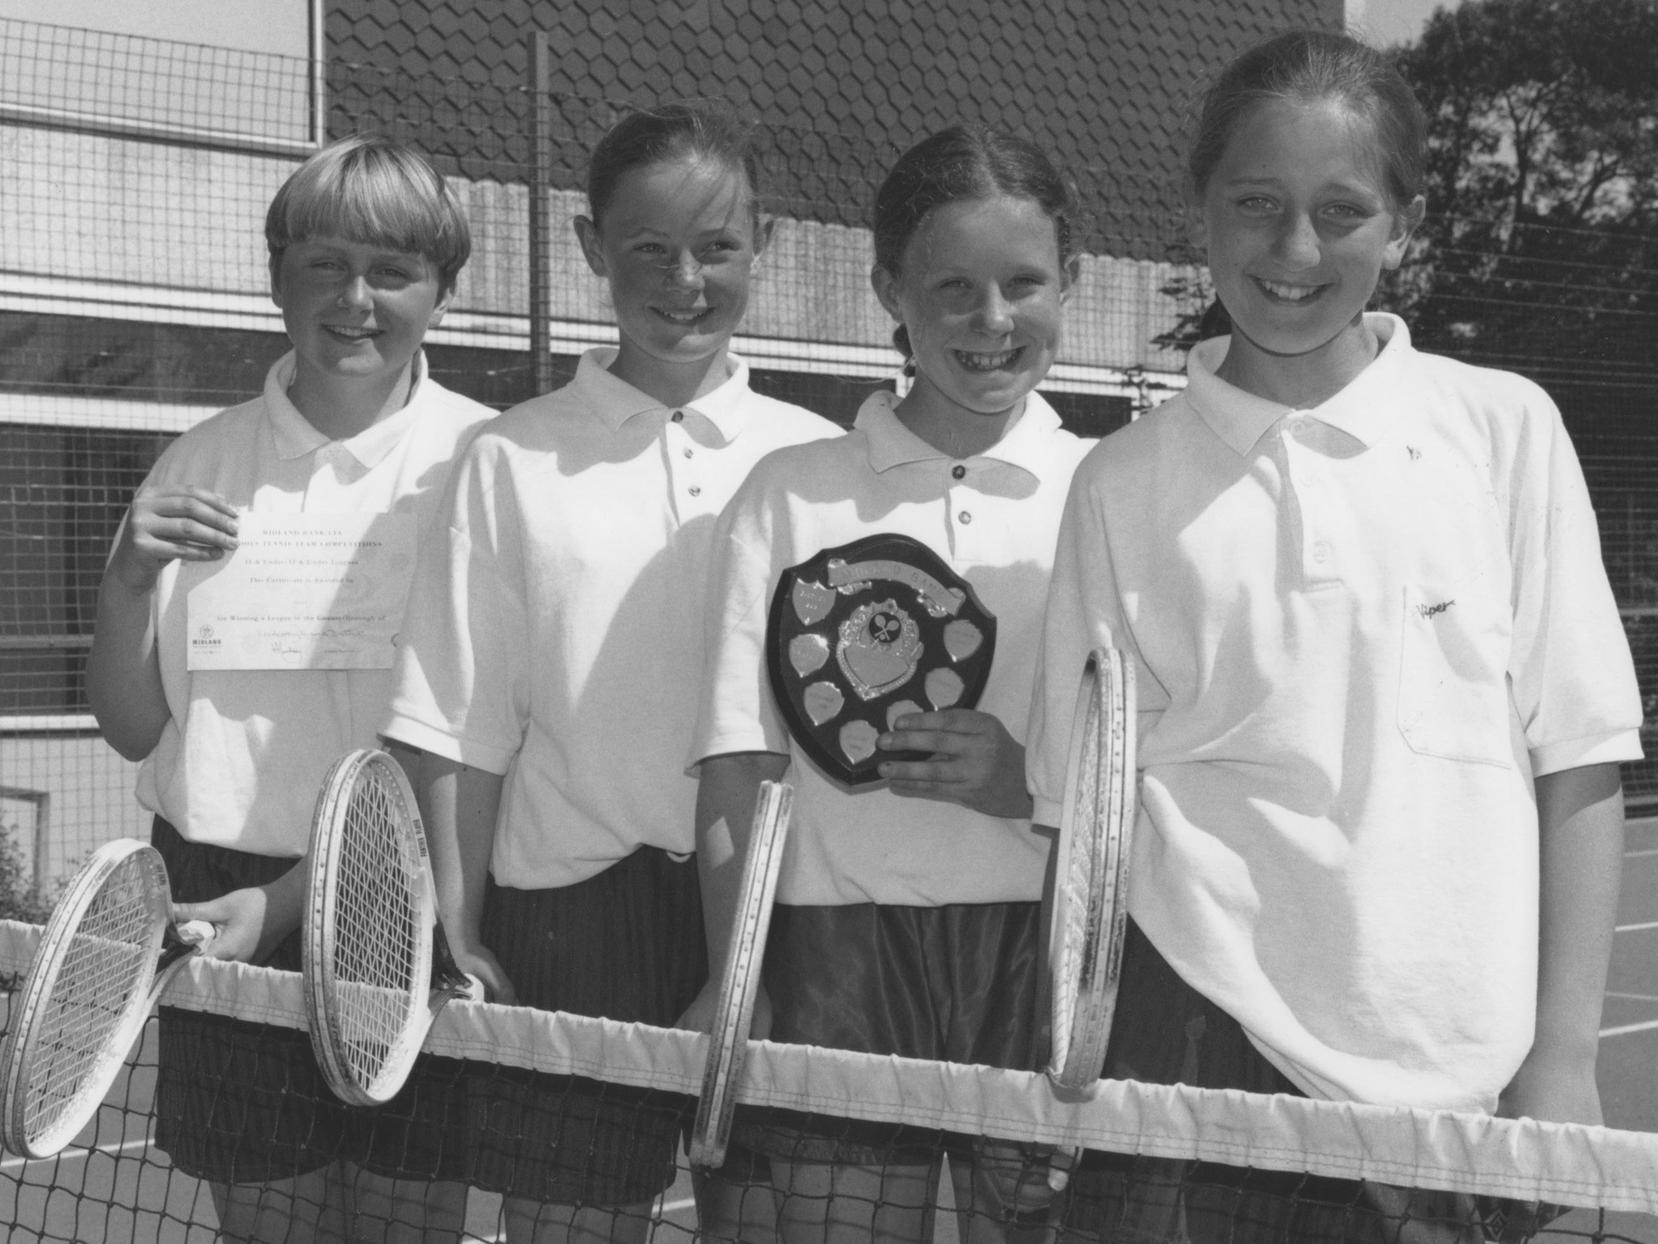 The victorious Scalby School under 13s tennis team won this tournament shield in June 1995. Pictured, left to right, Fay Evans, Sally Walsh, Lauren Moss and Lucy Clayton. Team member not pictured is Sarah Beeston.